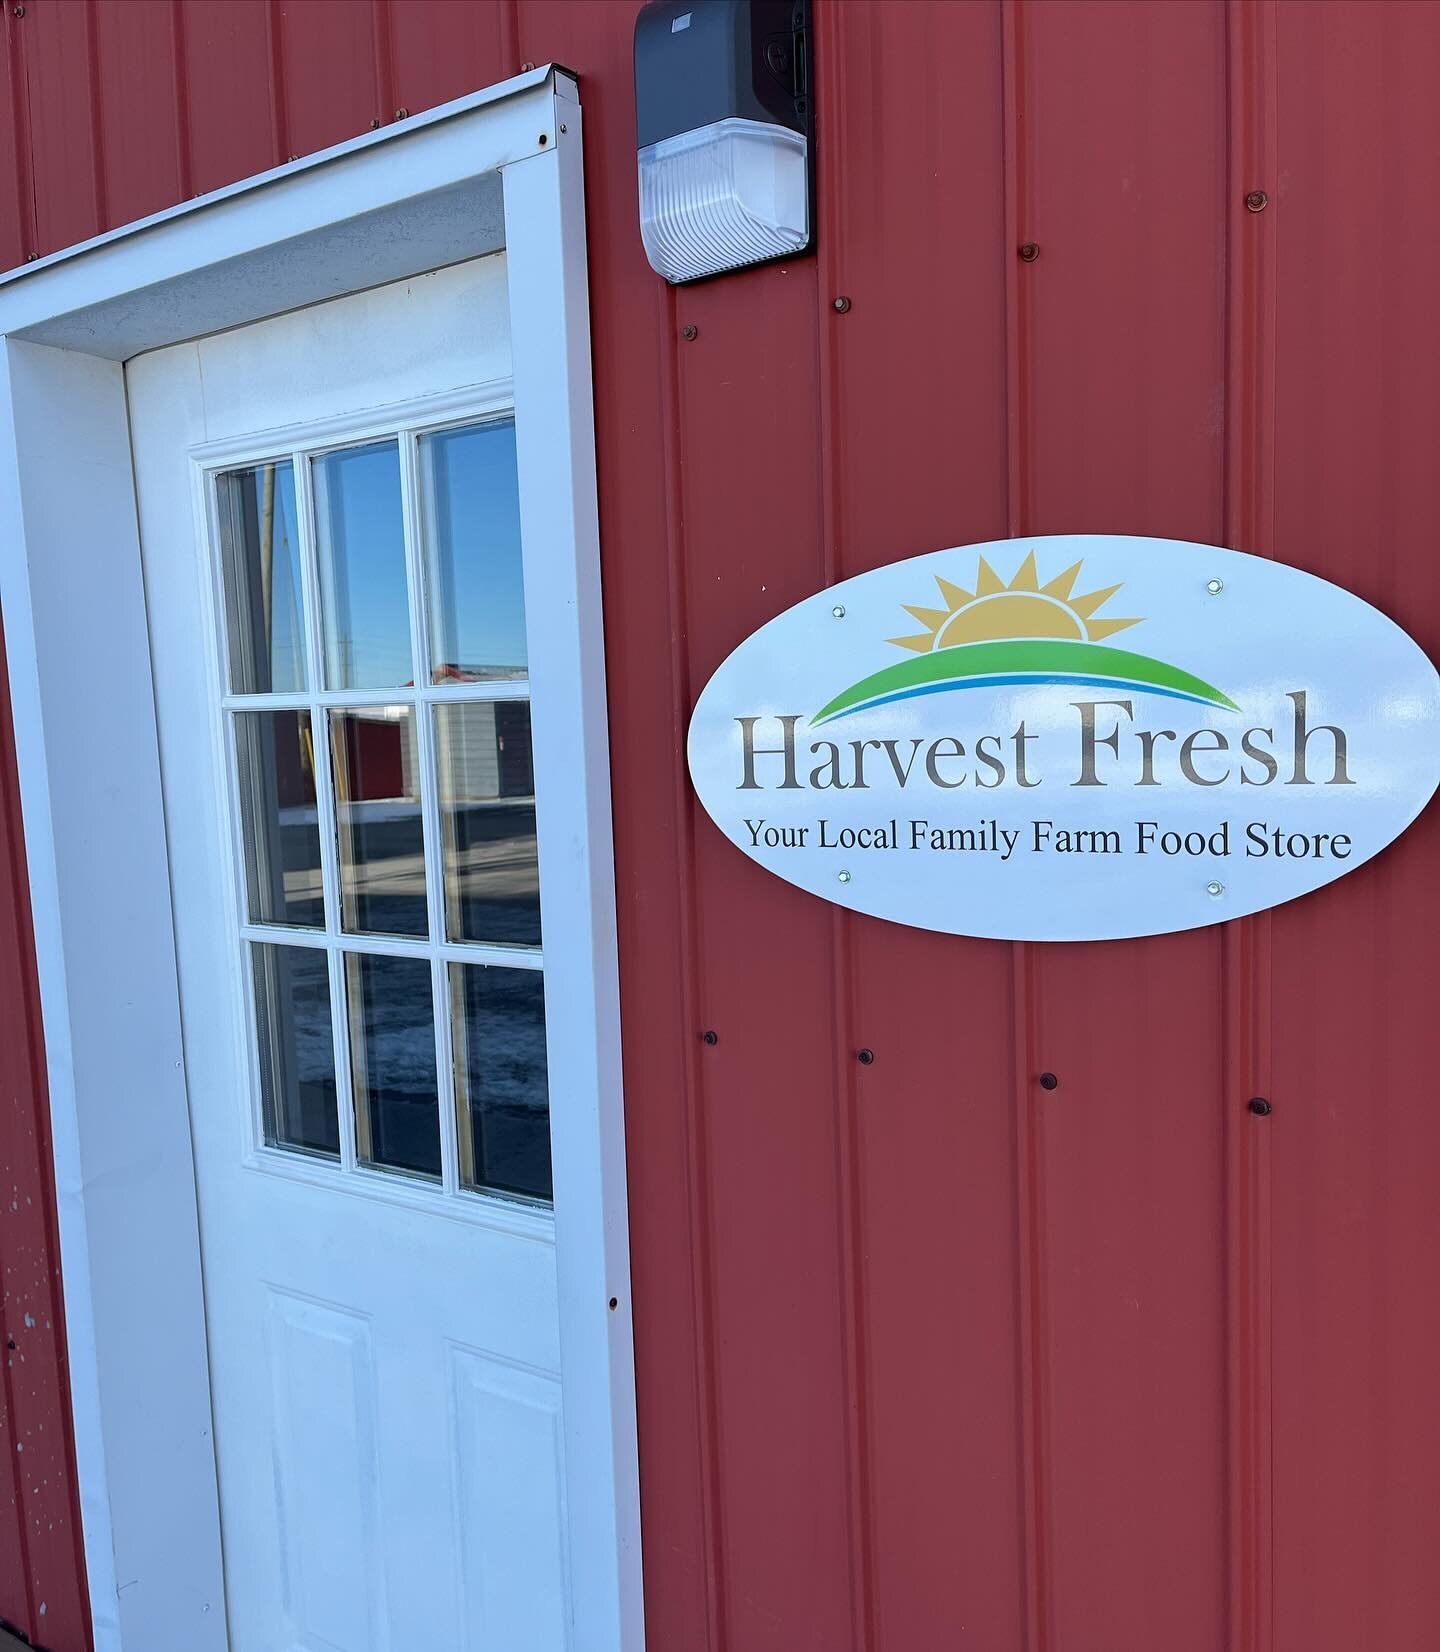 Visiting beautiful Harvest Fresh in Newburgh &mdash; friends in the Greater Napanee area, this farm store carries our soups and dips plus lots of freshly baked pies, meals, preserves&hellip; you gotta check them out!